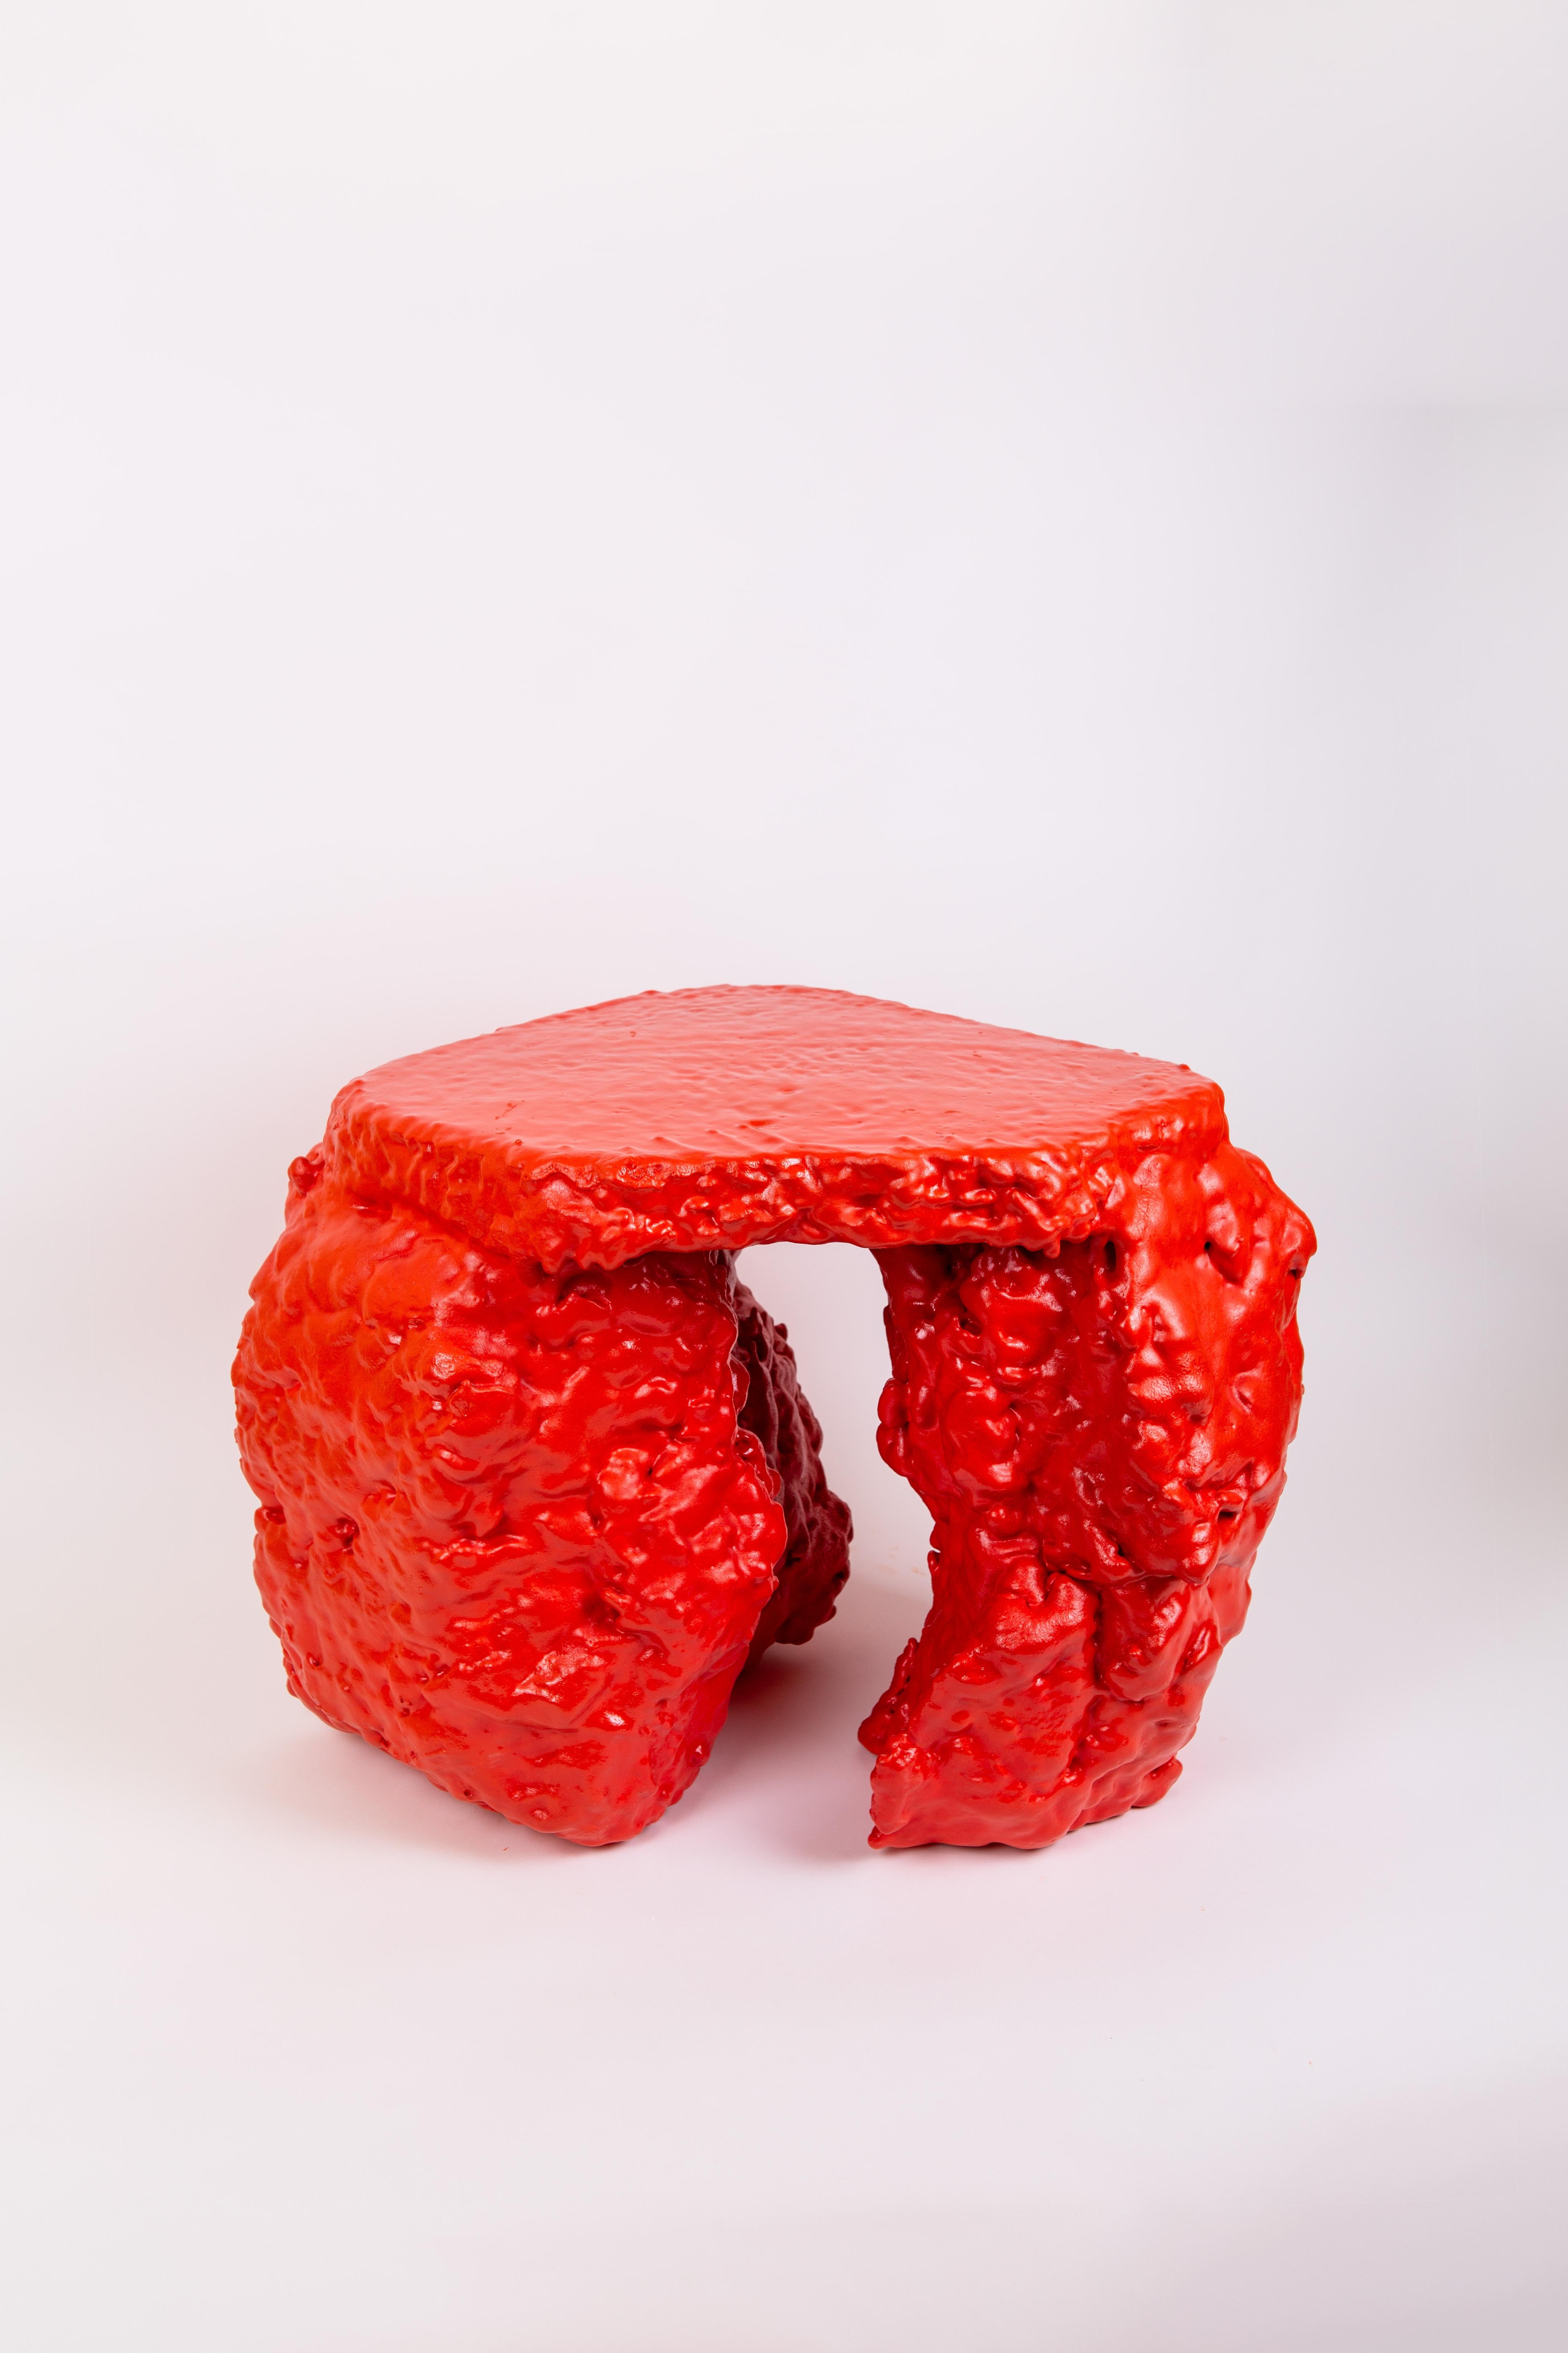 Red mass table by Sara Regal
Dimensions: D 45 x W 44 x H 45 cm
Materials: recycled plastic, pigments, concrete, polystyrene, lacquer
Customisable colors and measures, gloss or satin finish available,

Table made of compressed recycled waste